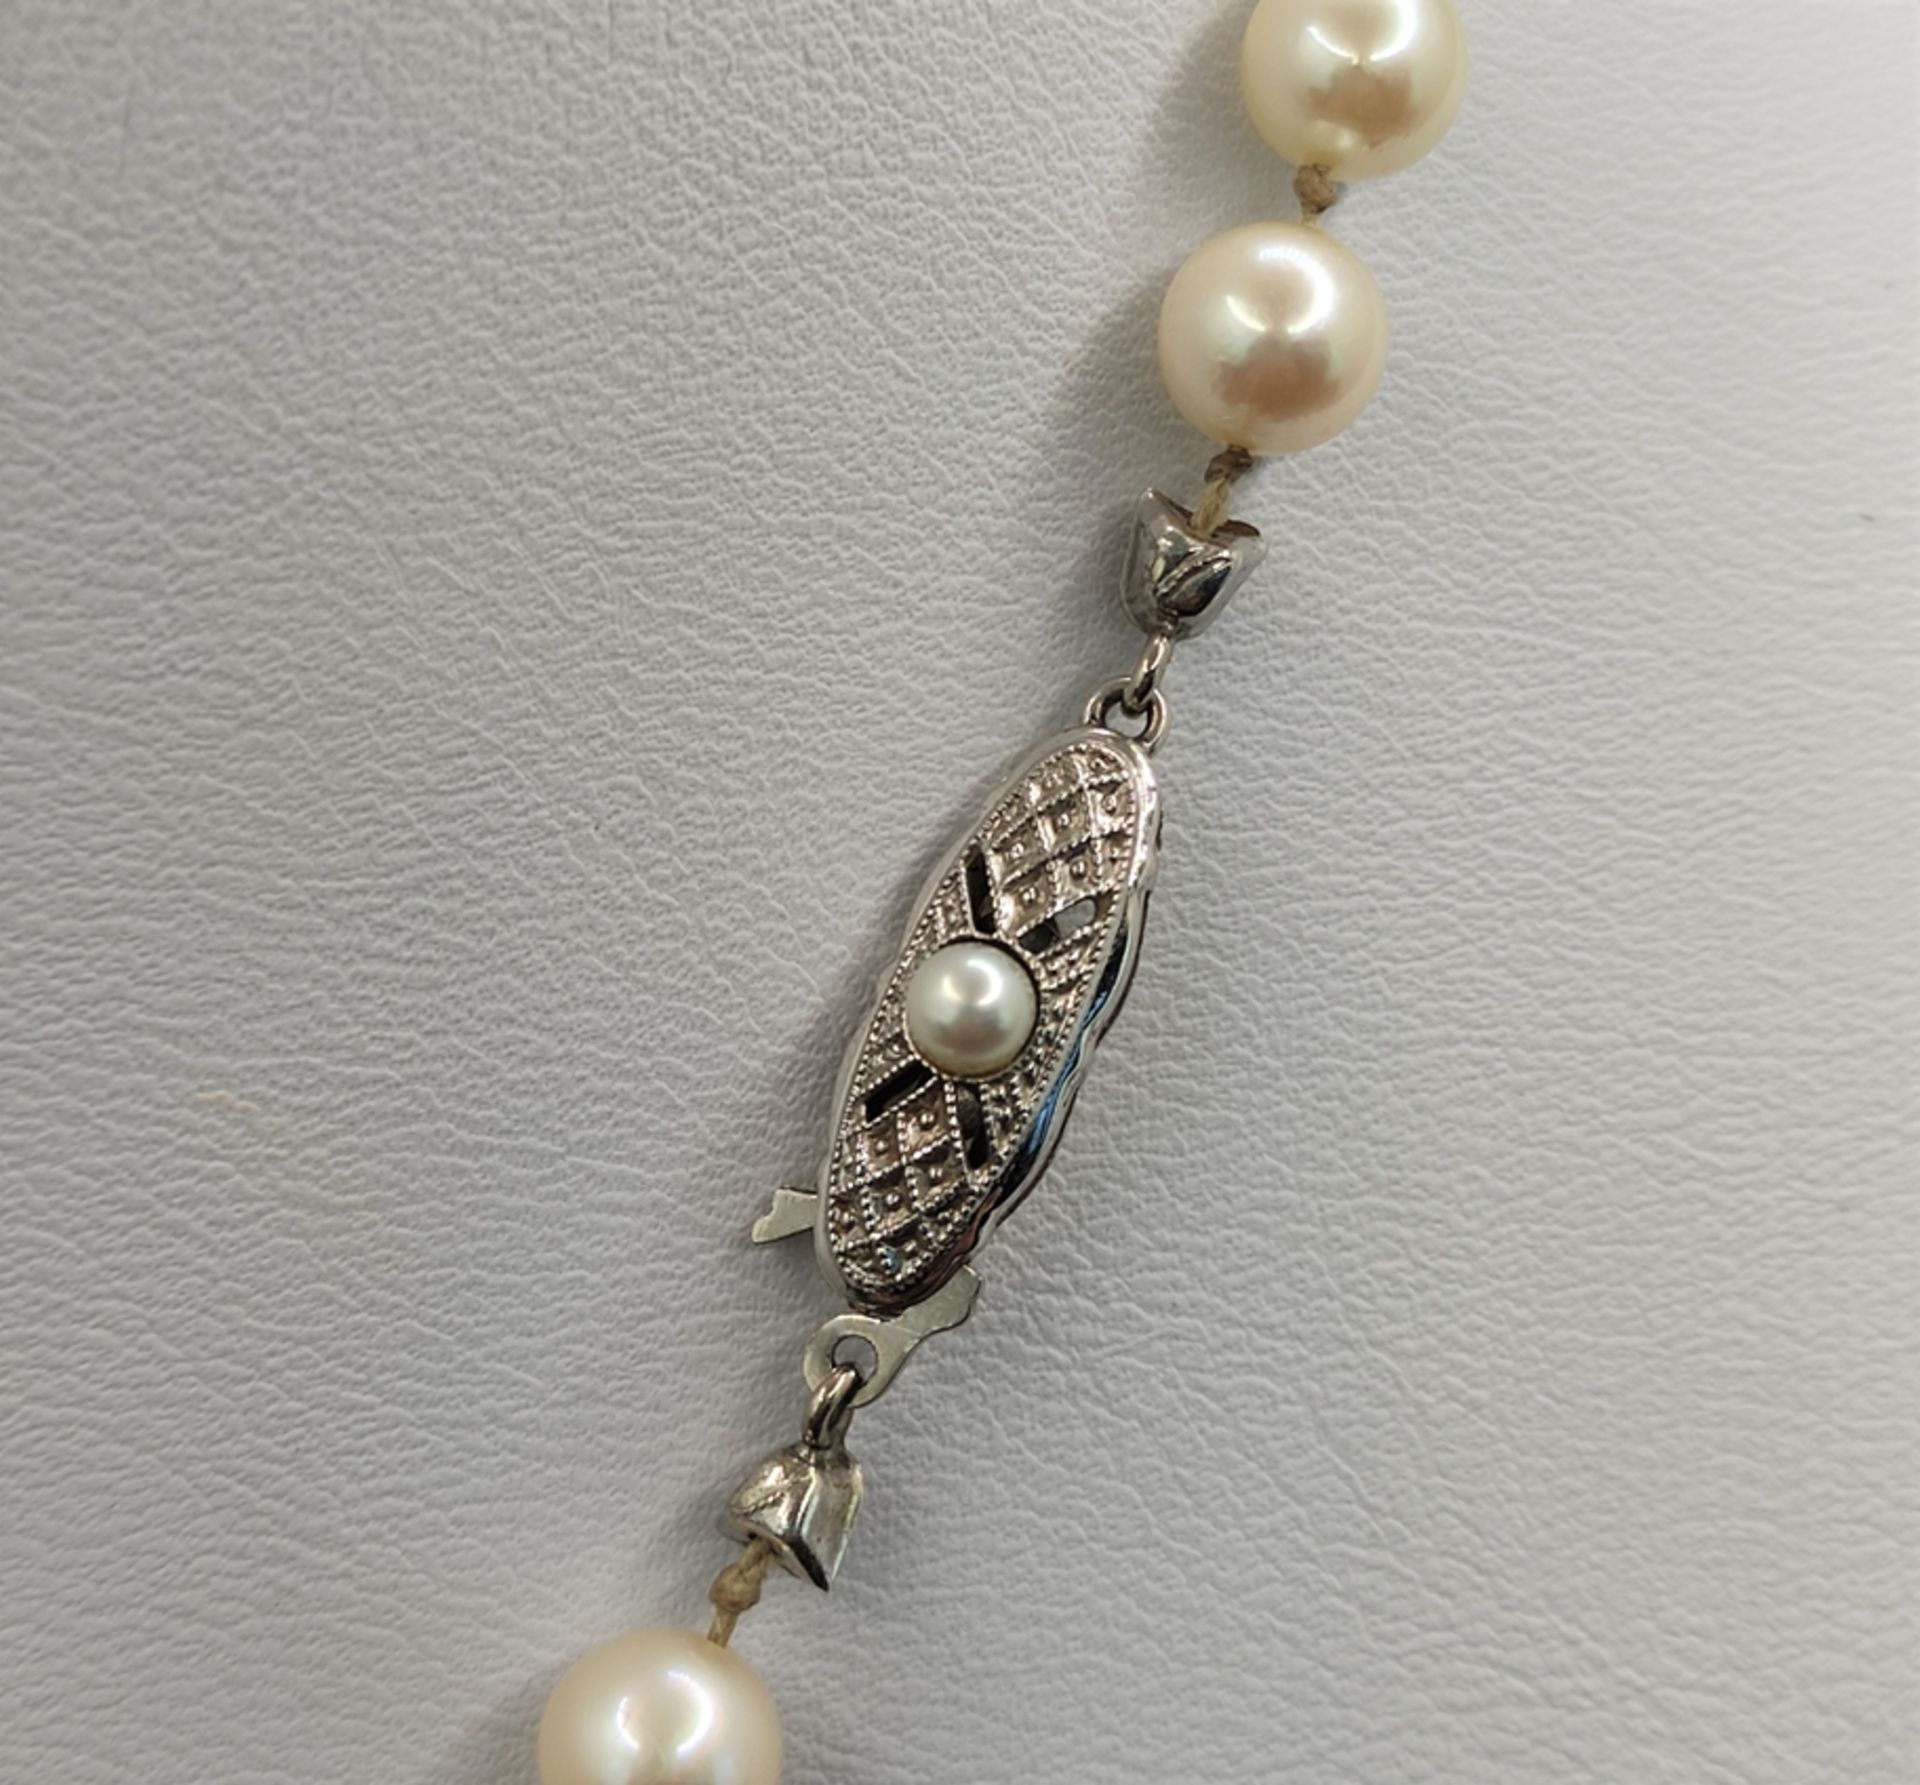 Akoya wedding necklace, necklace made of white genuine saltwater cultured pearls, fine delicate pin - Image 3 of 4